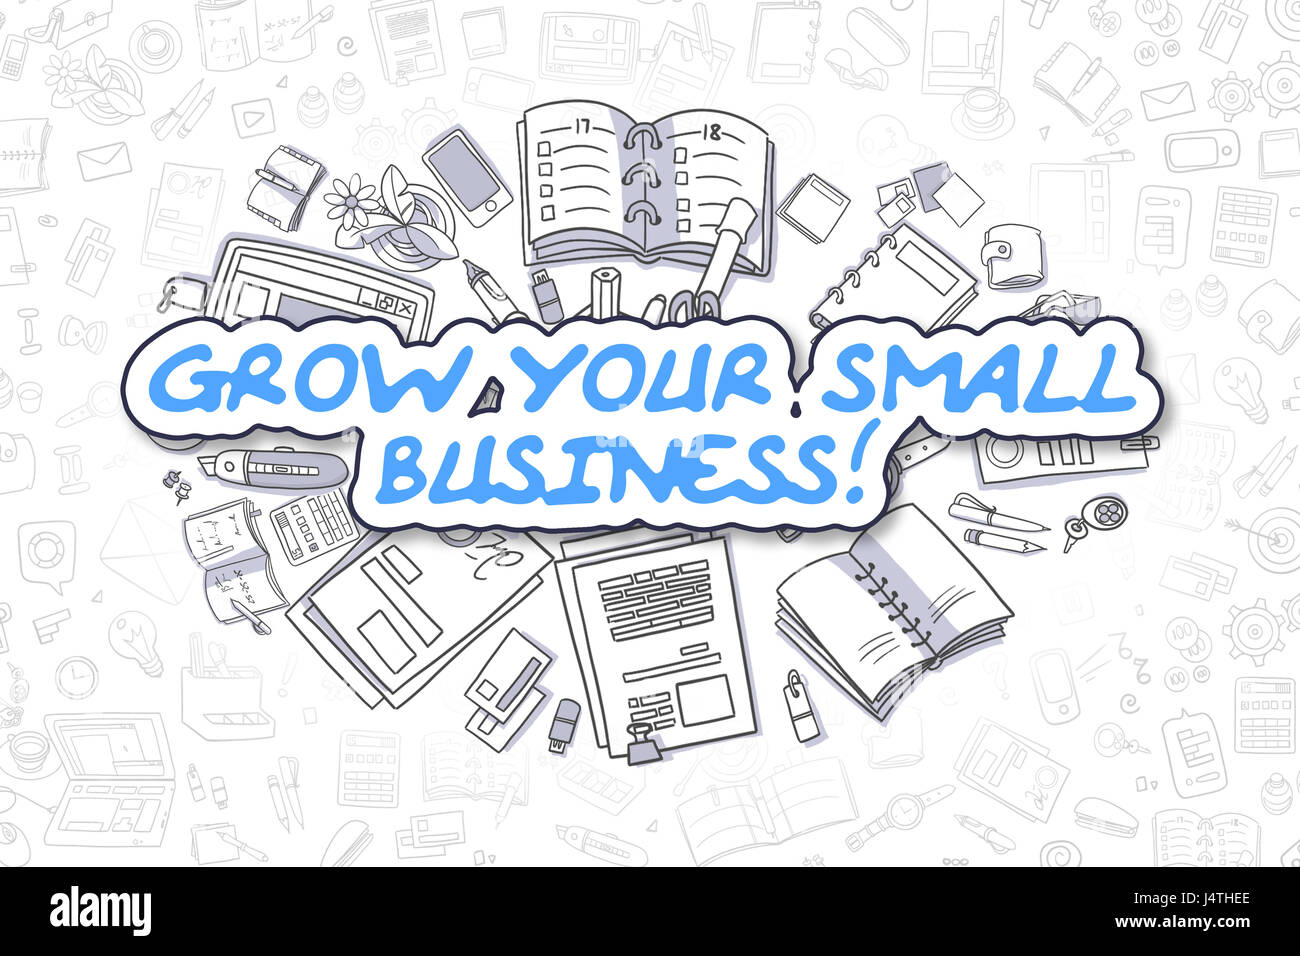 Grow Your Small Business - Business Concept. Stock Photo